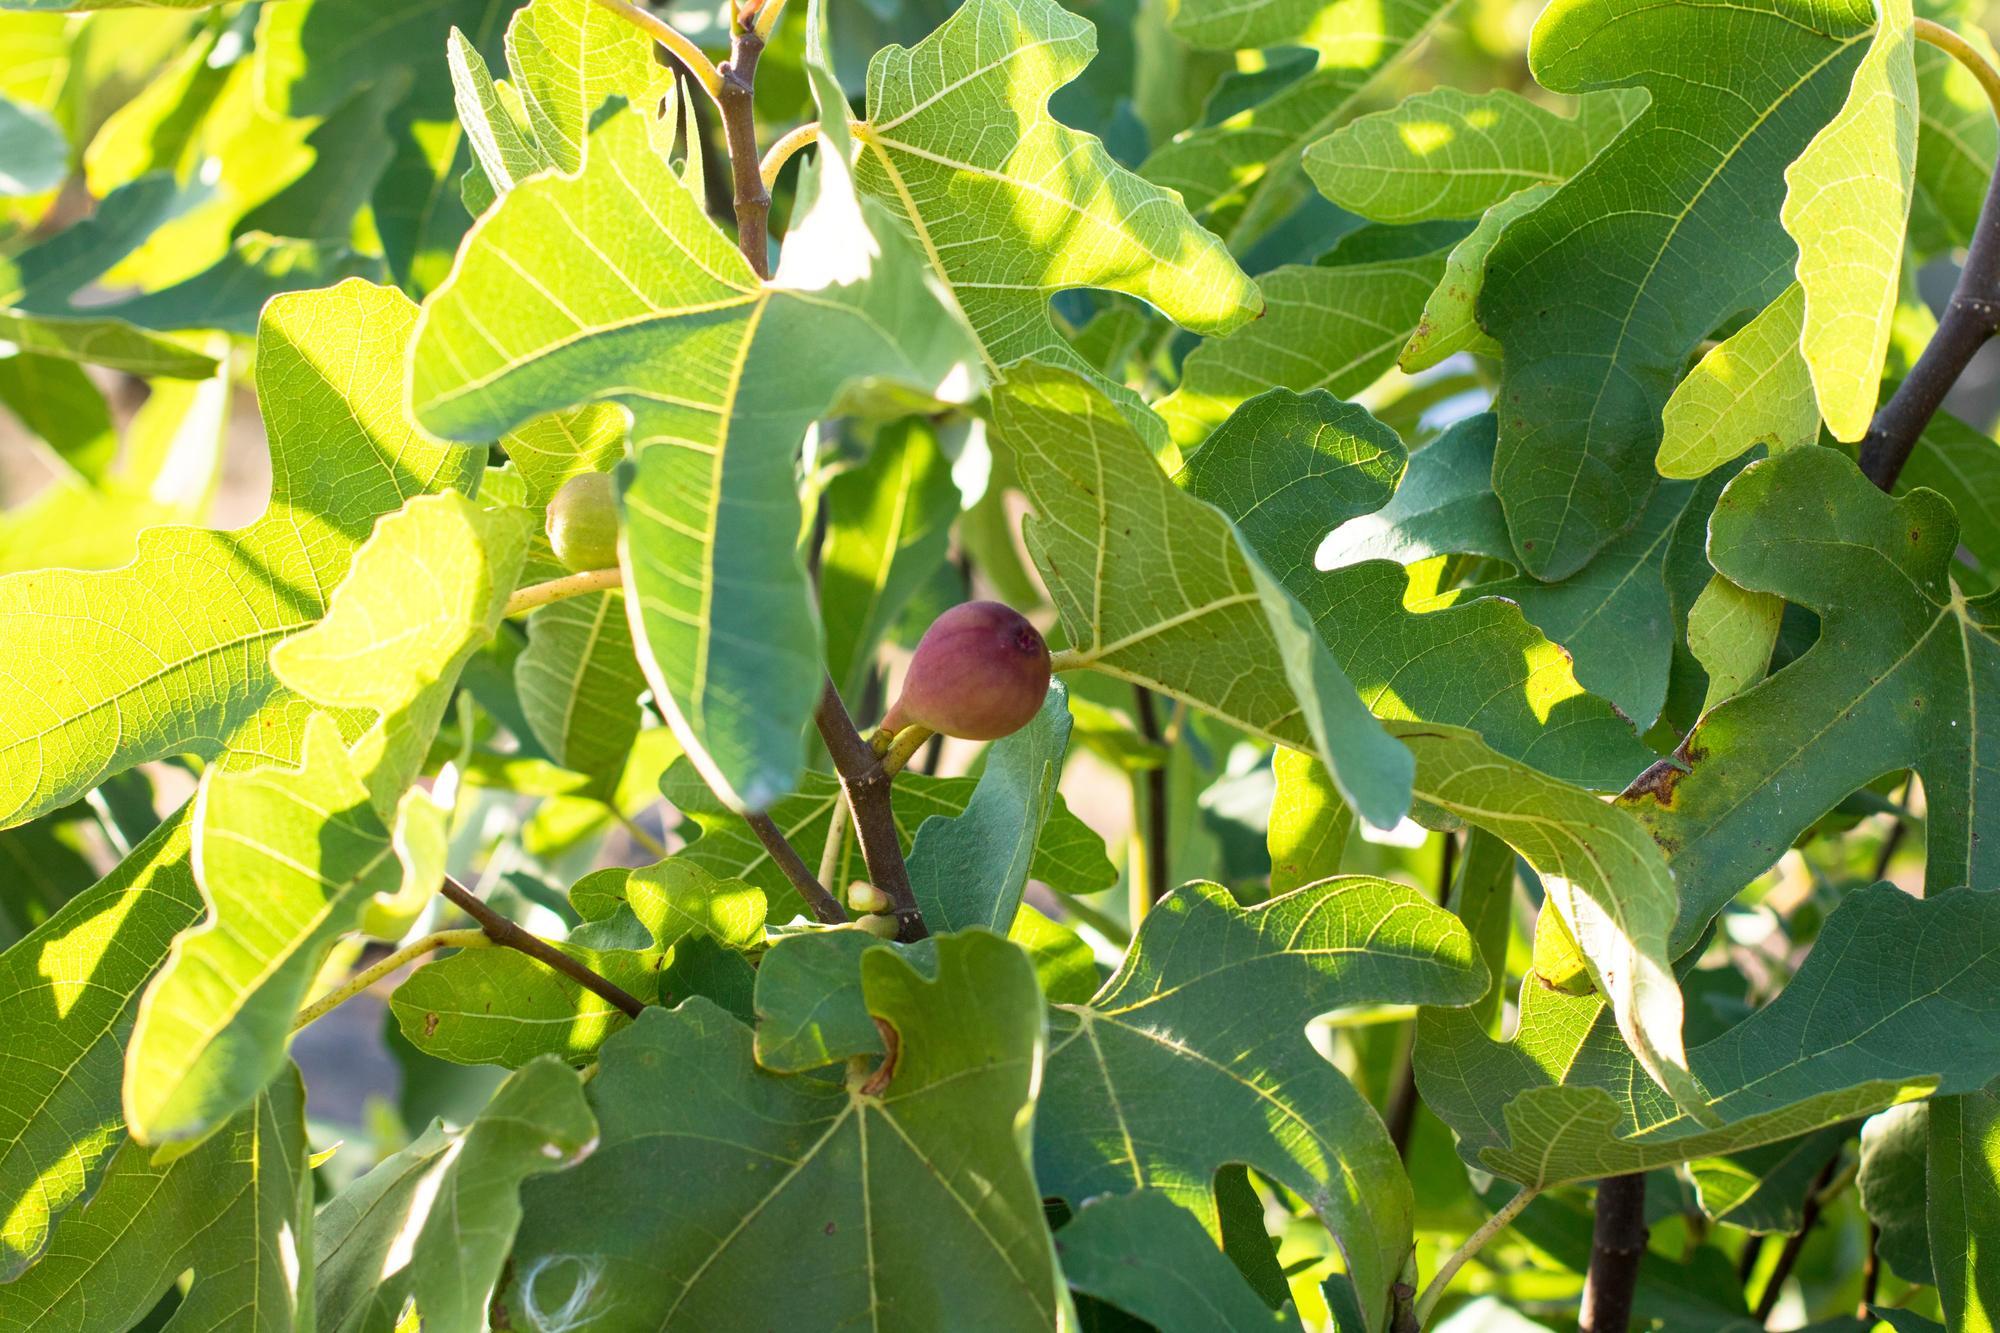 A fig tree with a fig on its branch.